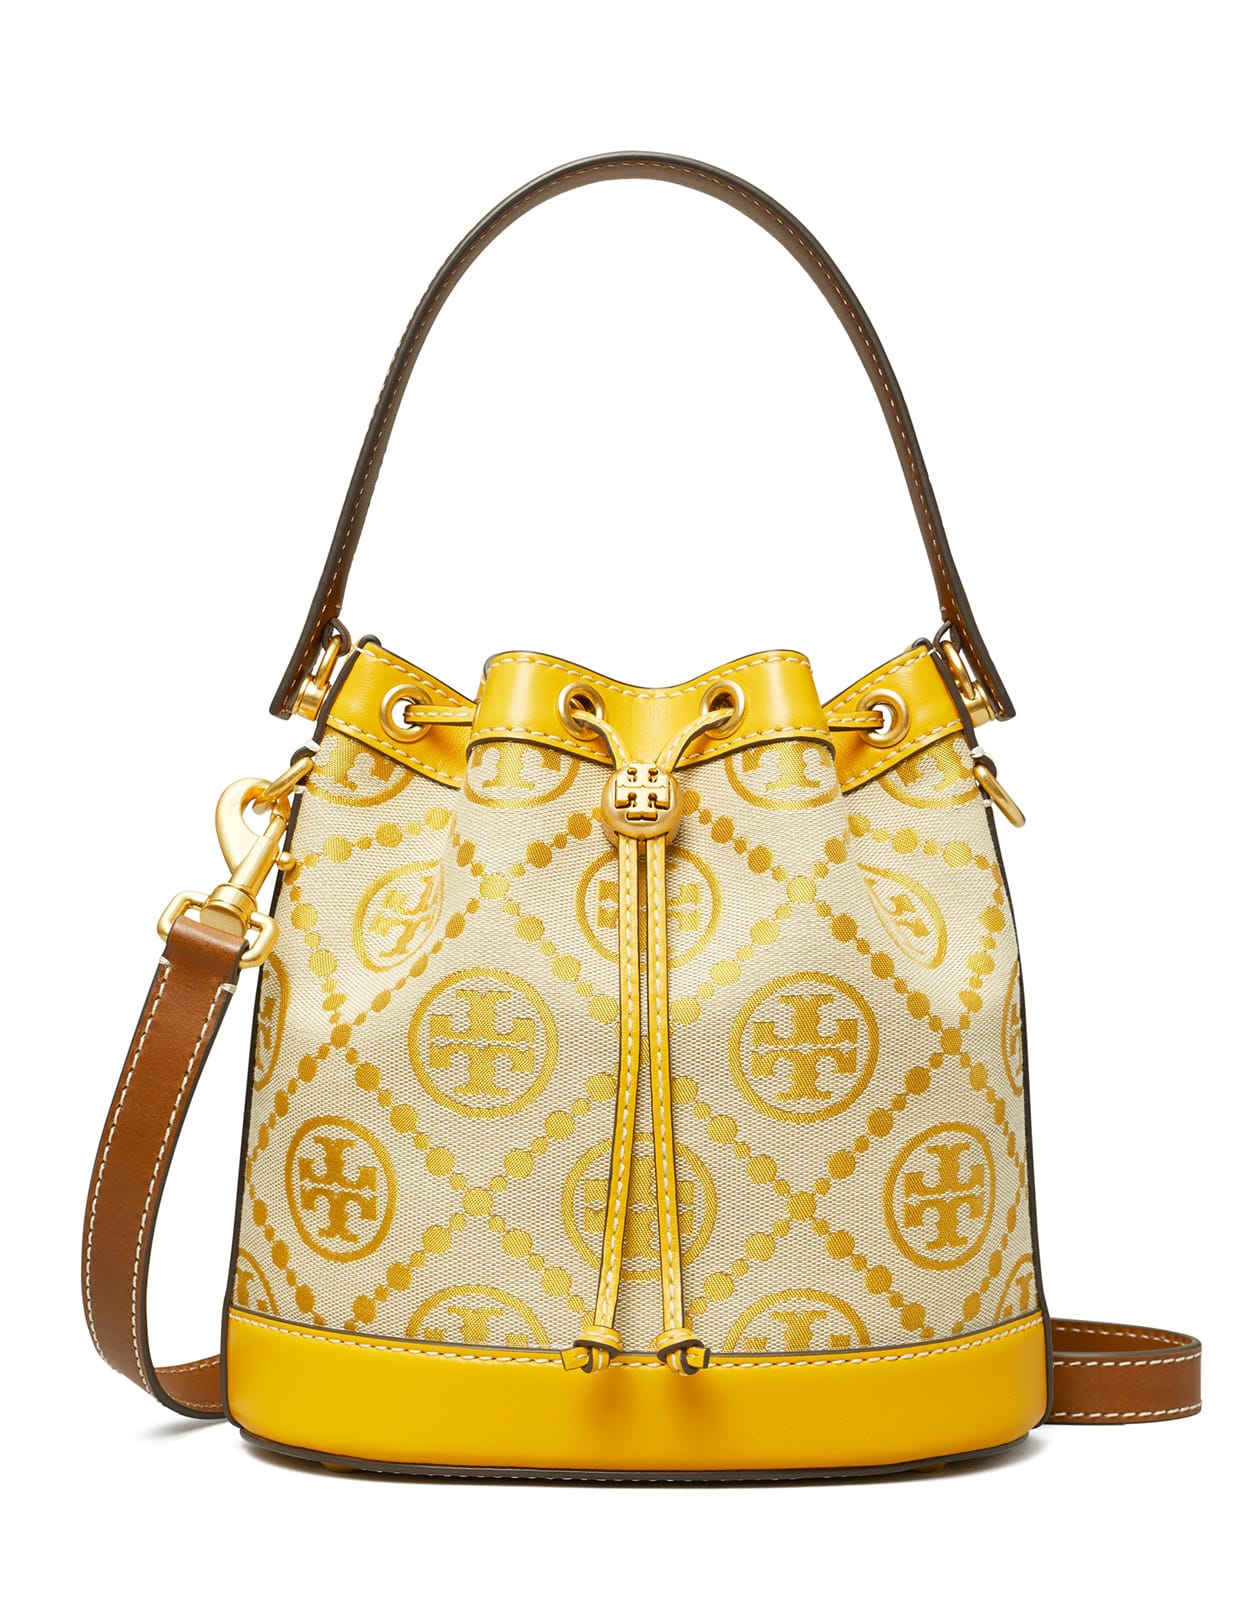 Tory Burch Yellow Bucket Bag With T Monogram In Jacquard